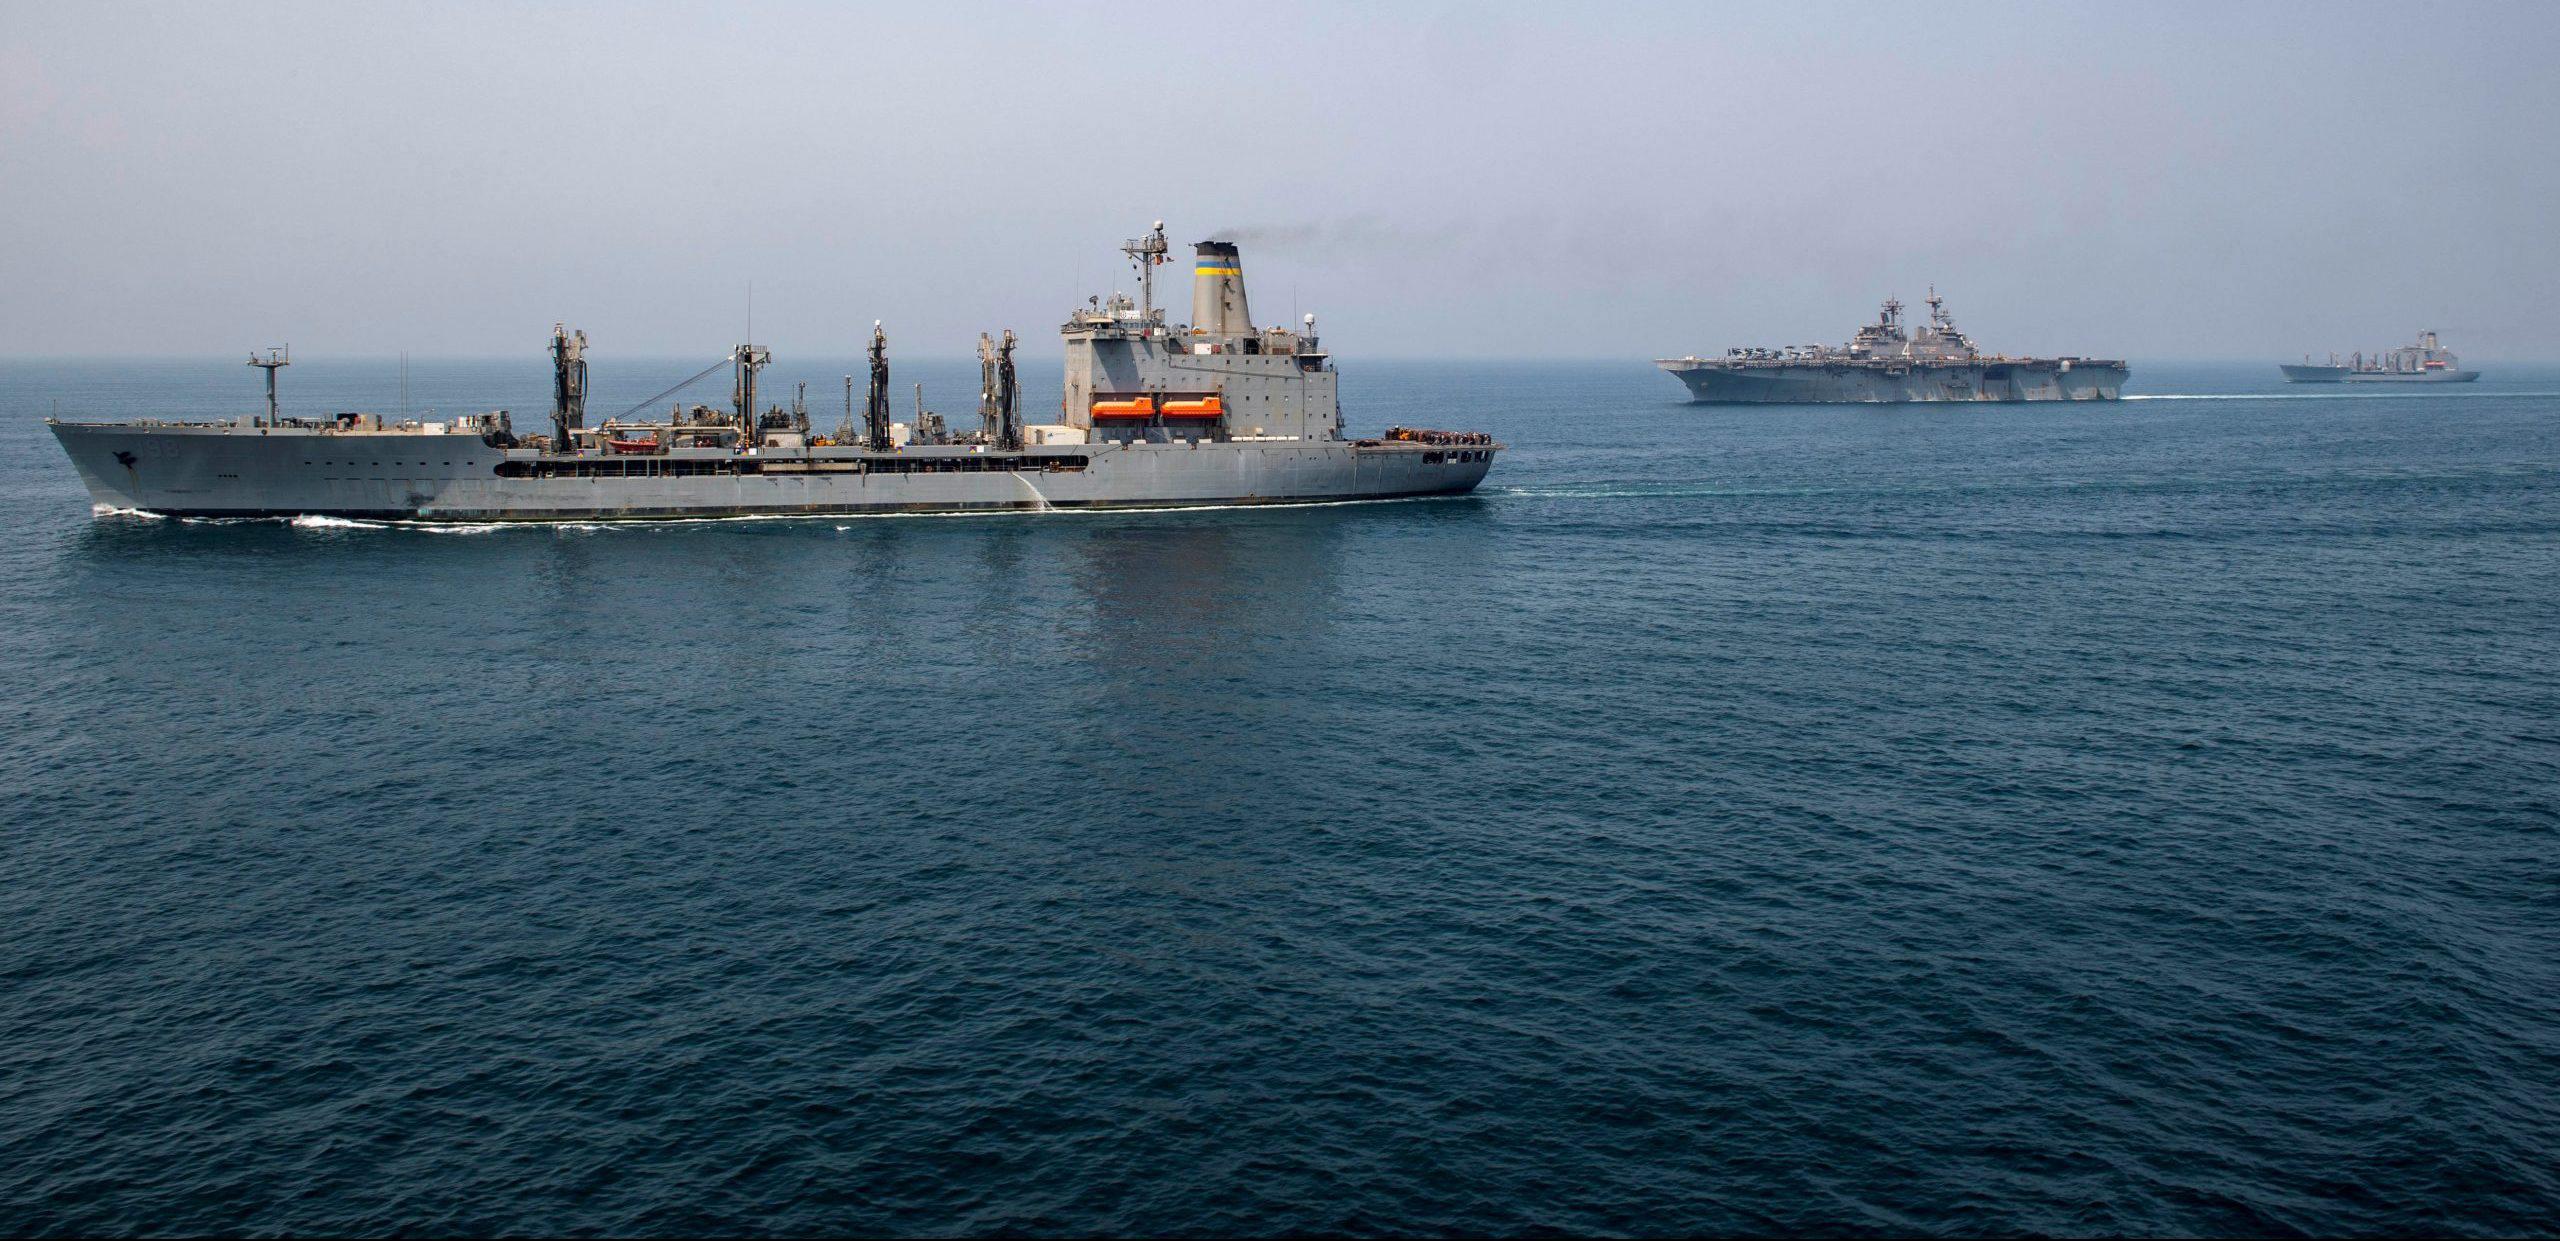 ifmat - America must deter Iranian maritime aggression in the Persian Gulf